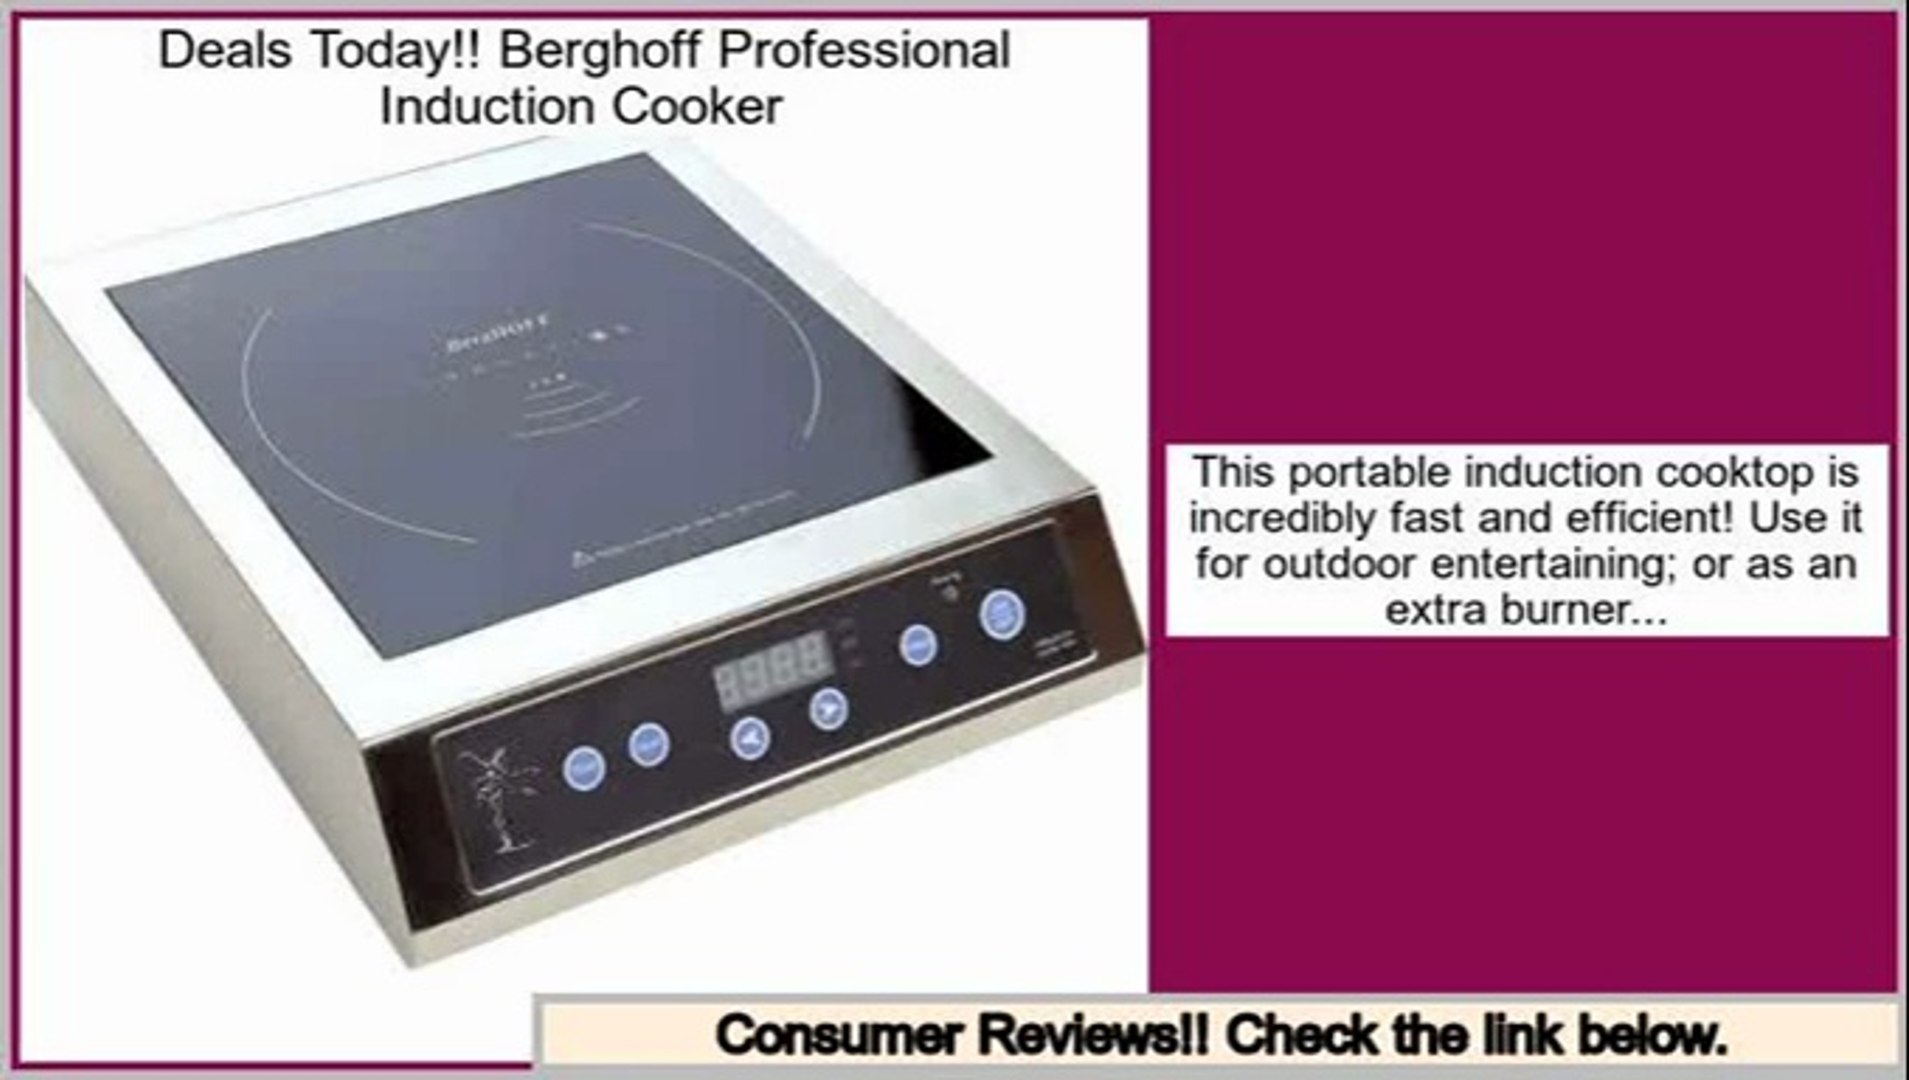 Discount Berghoff Professional Induction Cooker Video Dailymotion